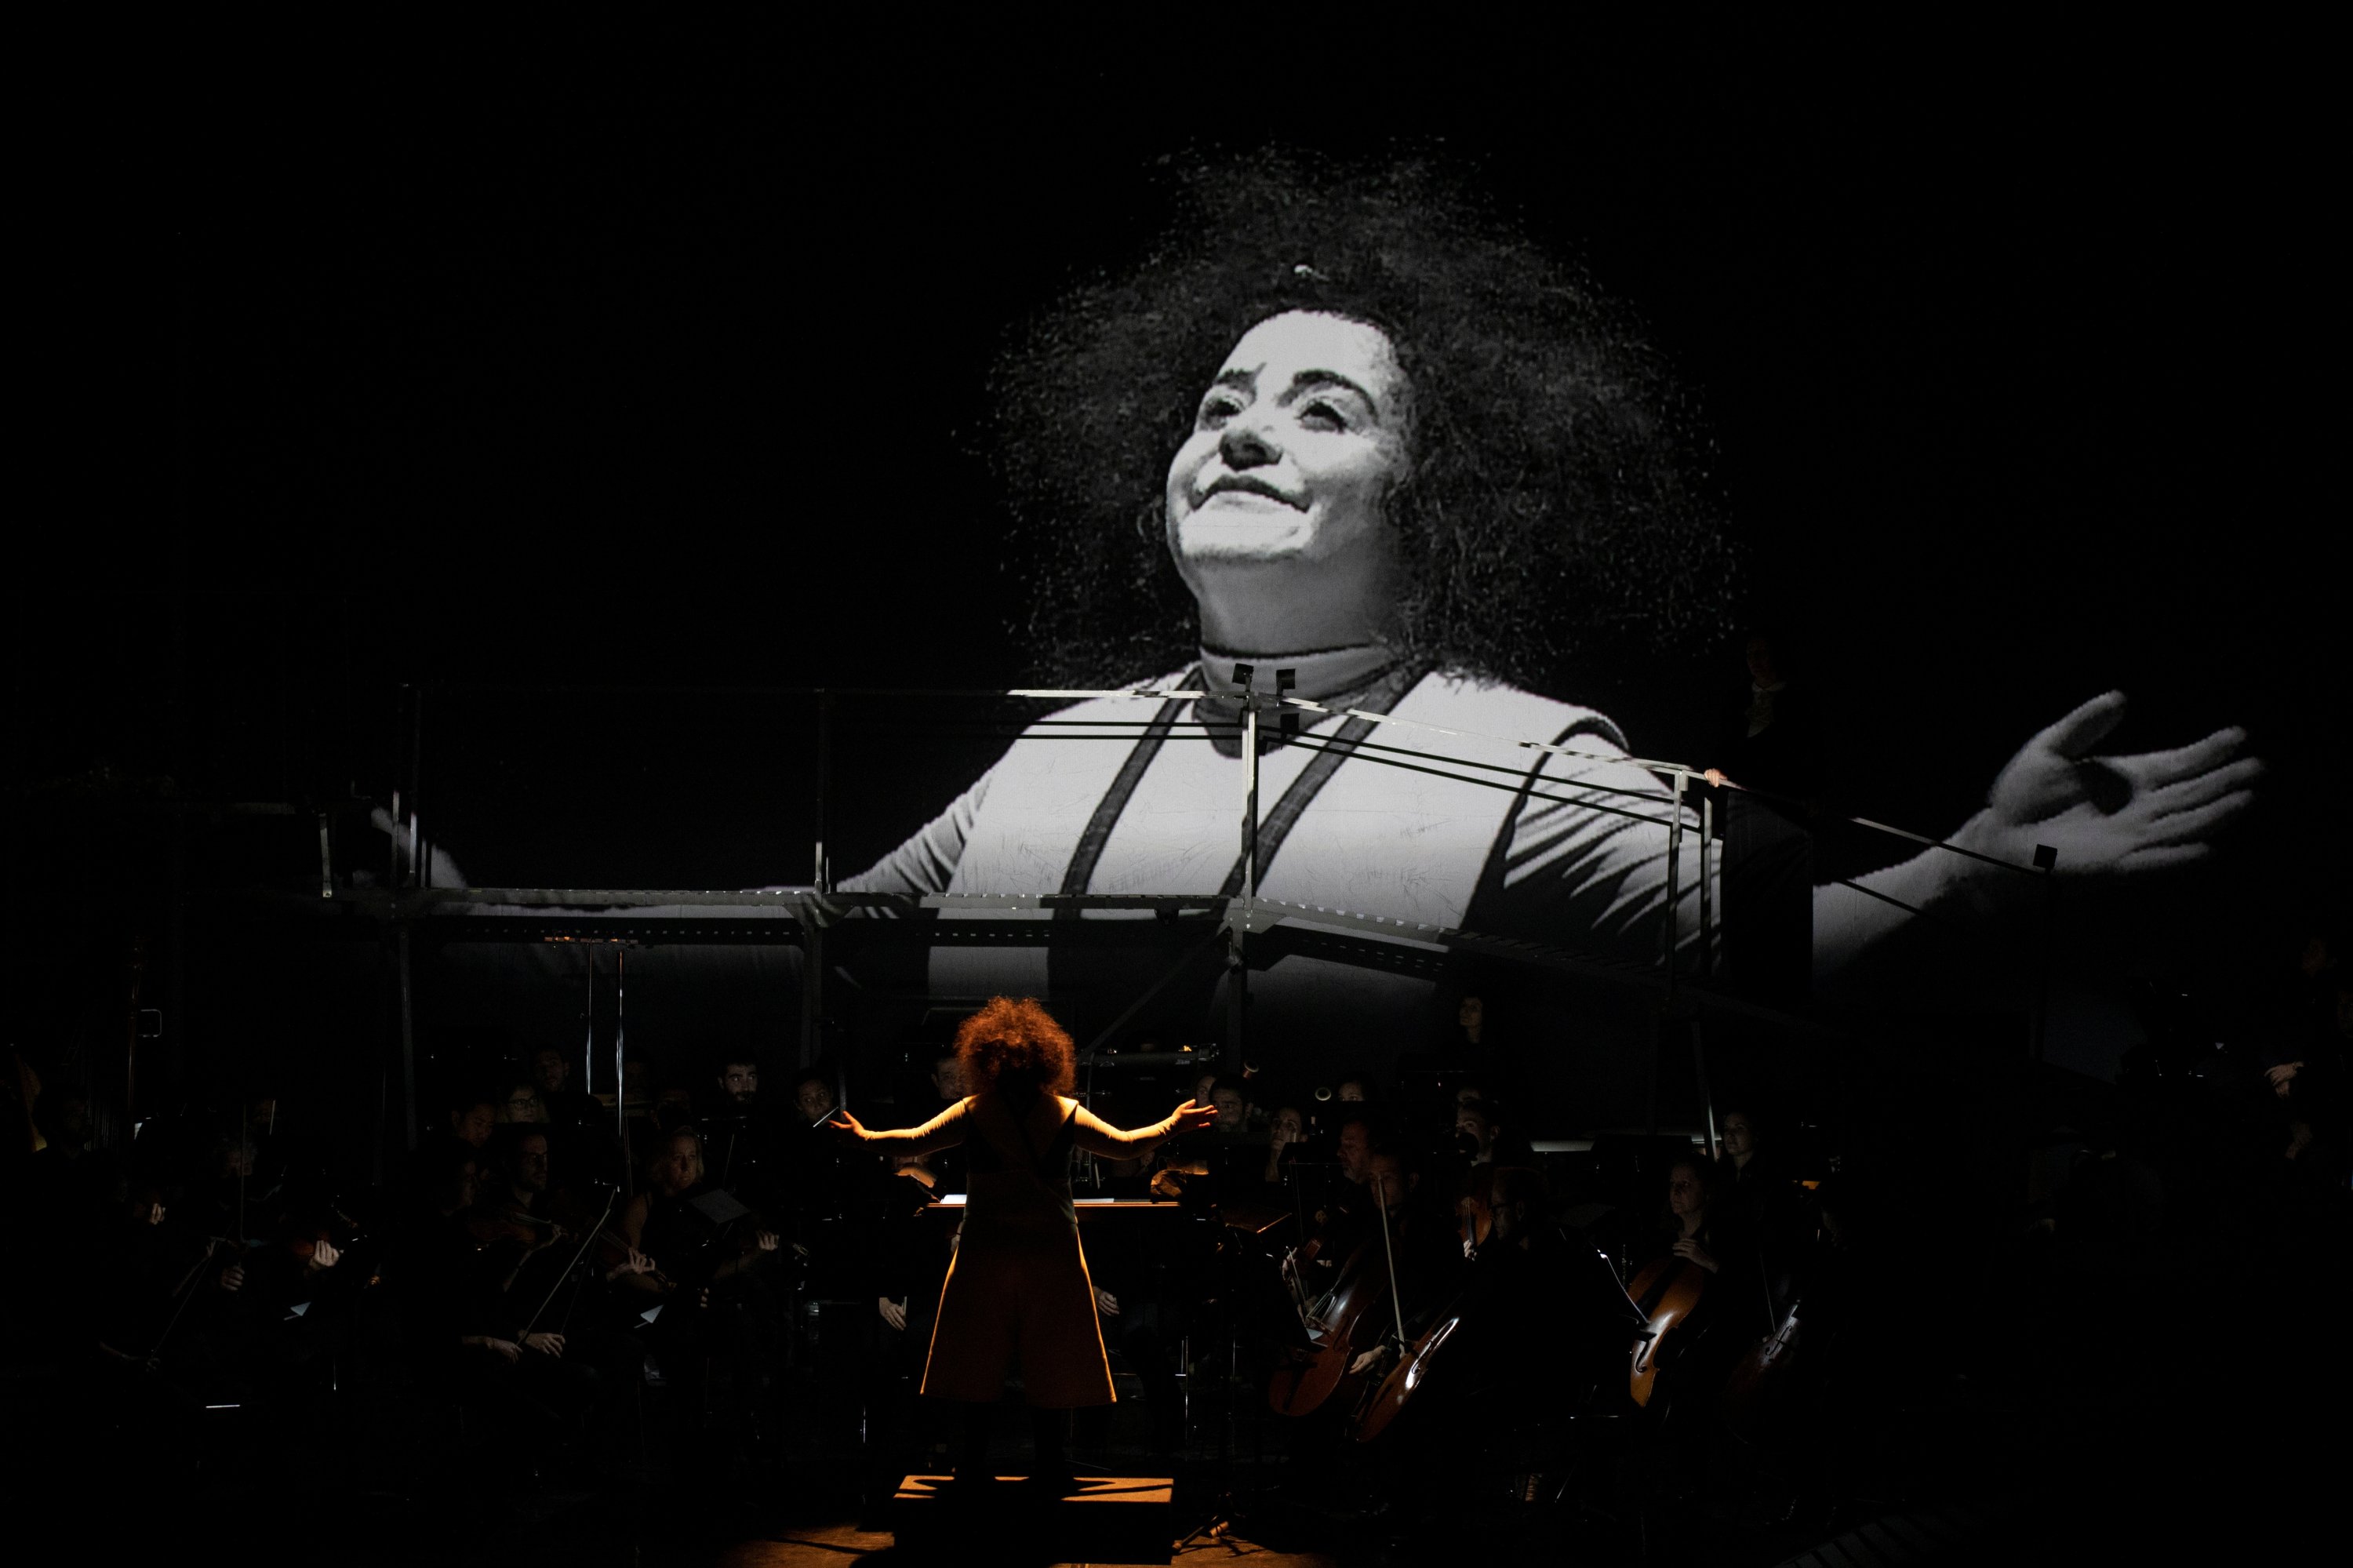 Clown performer Gabriela Munoz stands in front of the GIO Symphonia orchestra during a preview of "The Silence of Sound" in Girona, Spain on November 25, 2021. (REUTERS)